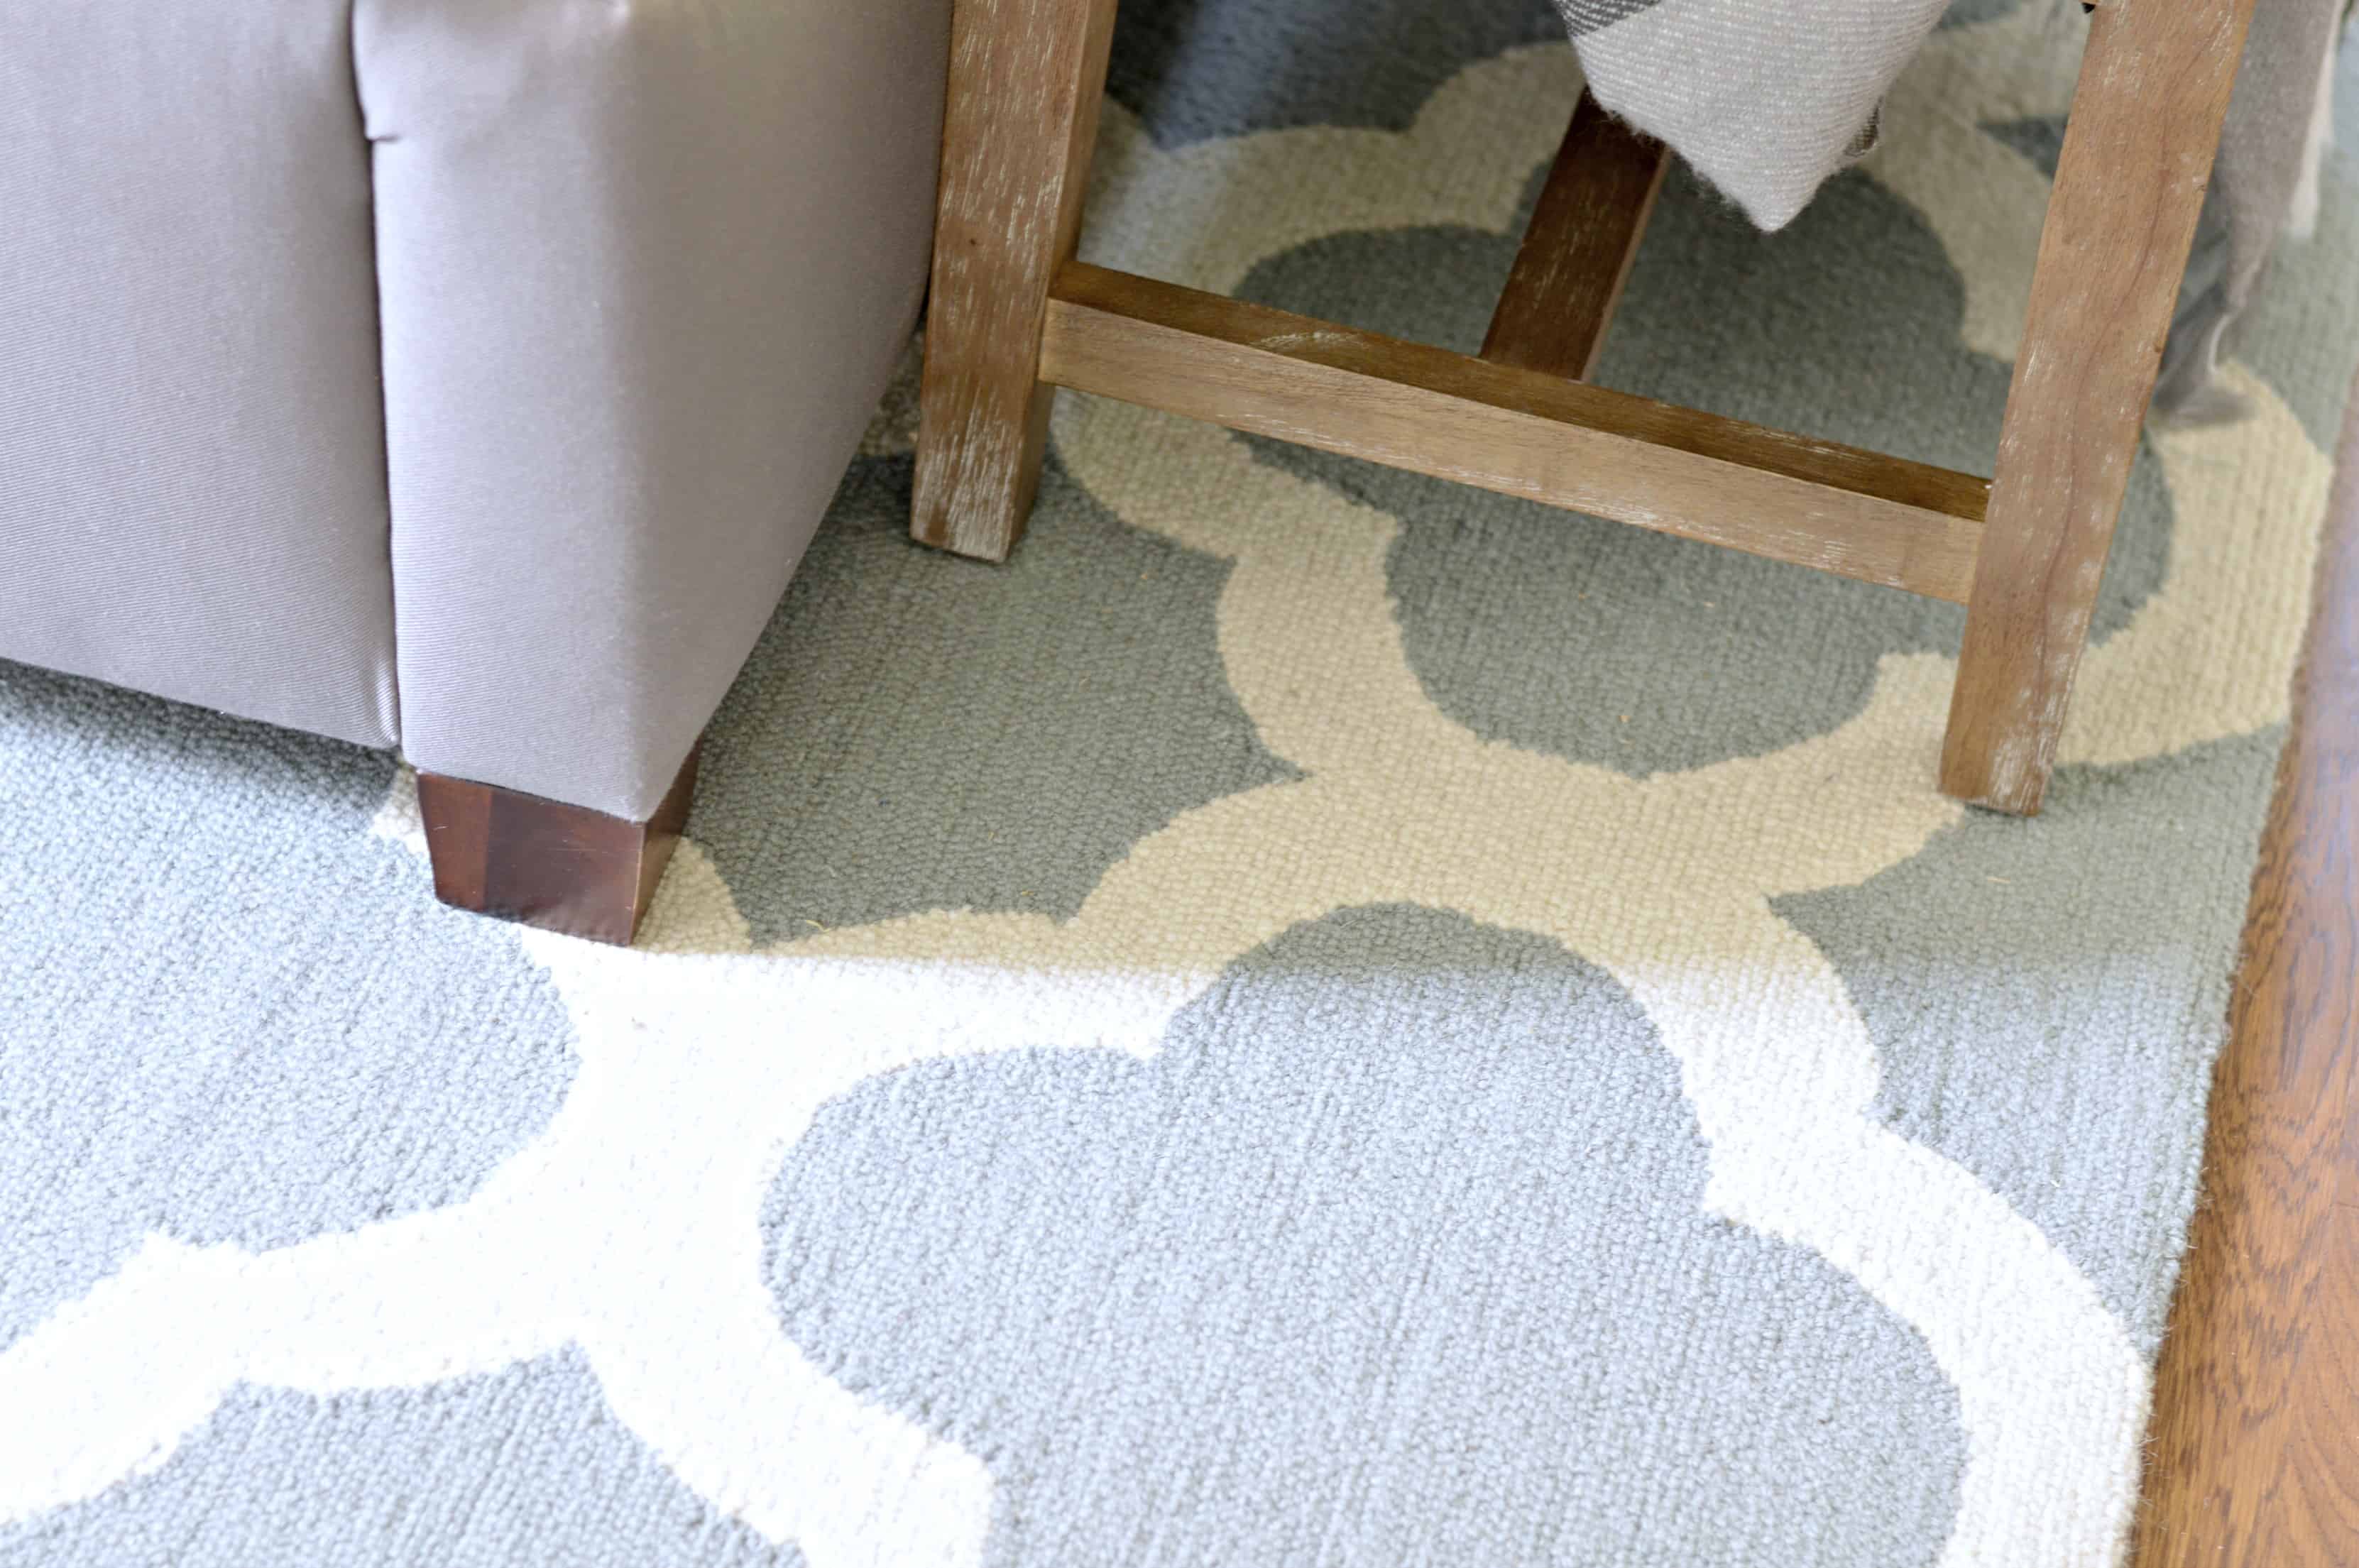 The bottom of the bed and bench, showing the details of a light blue and white area rug